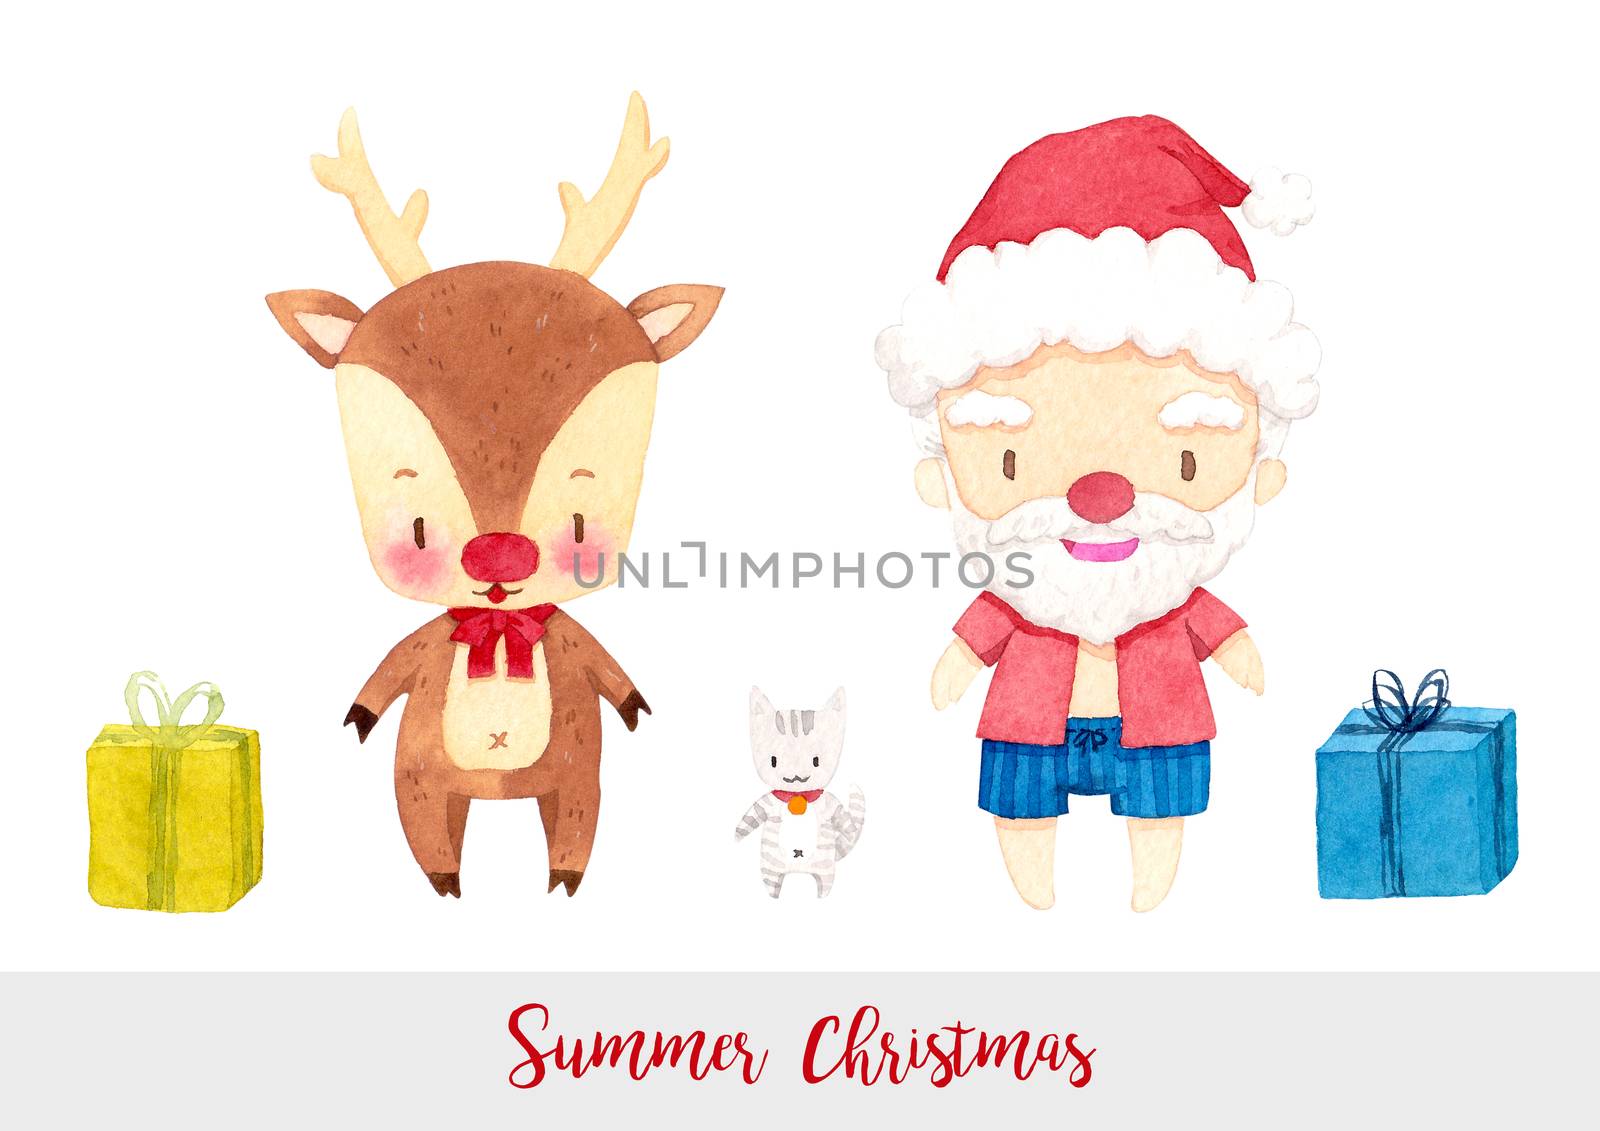 Cute Santa Claus, reindeer, cat and gift boxes. cartoon character watercolor hand painting for decoration in winter, Christmas, and new year festival advertising. isolated on white background. clipping path.